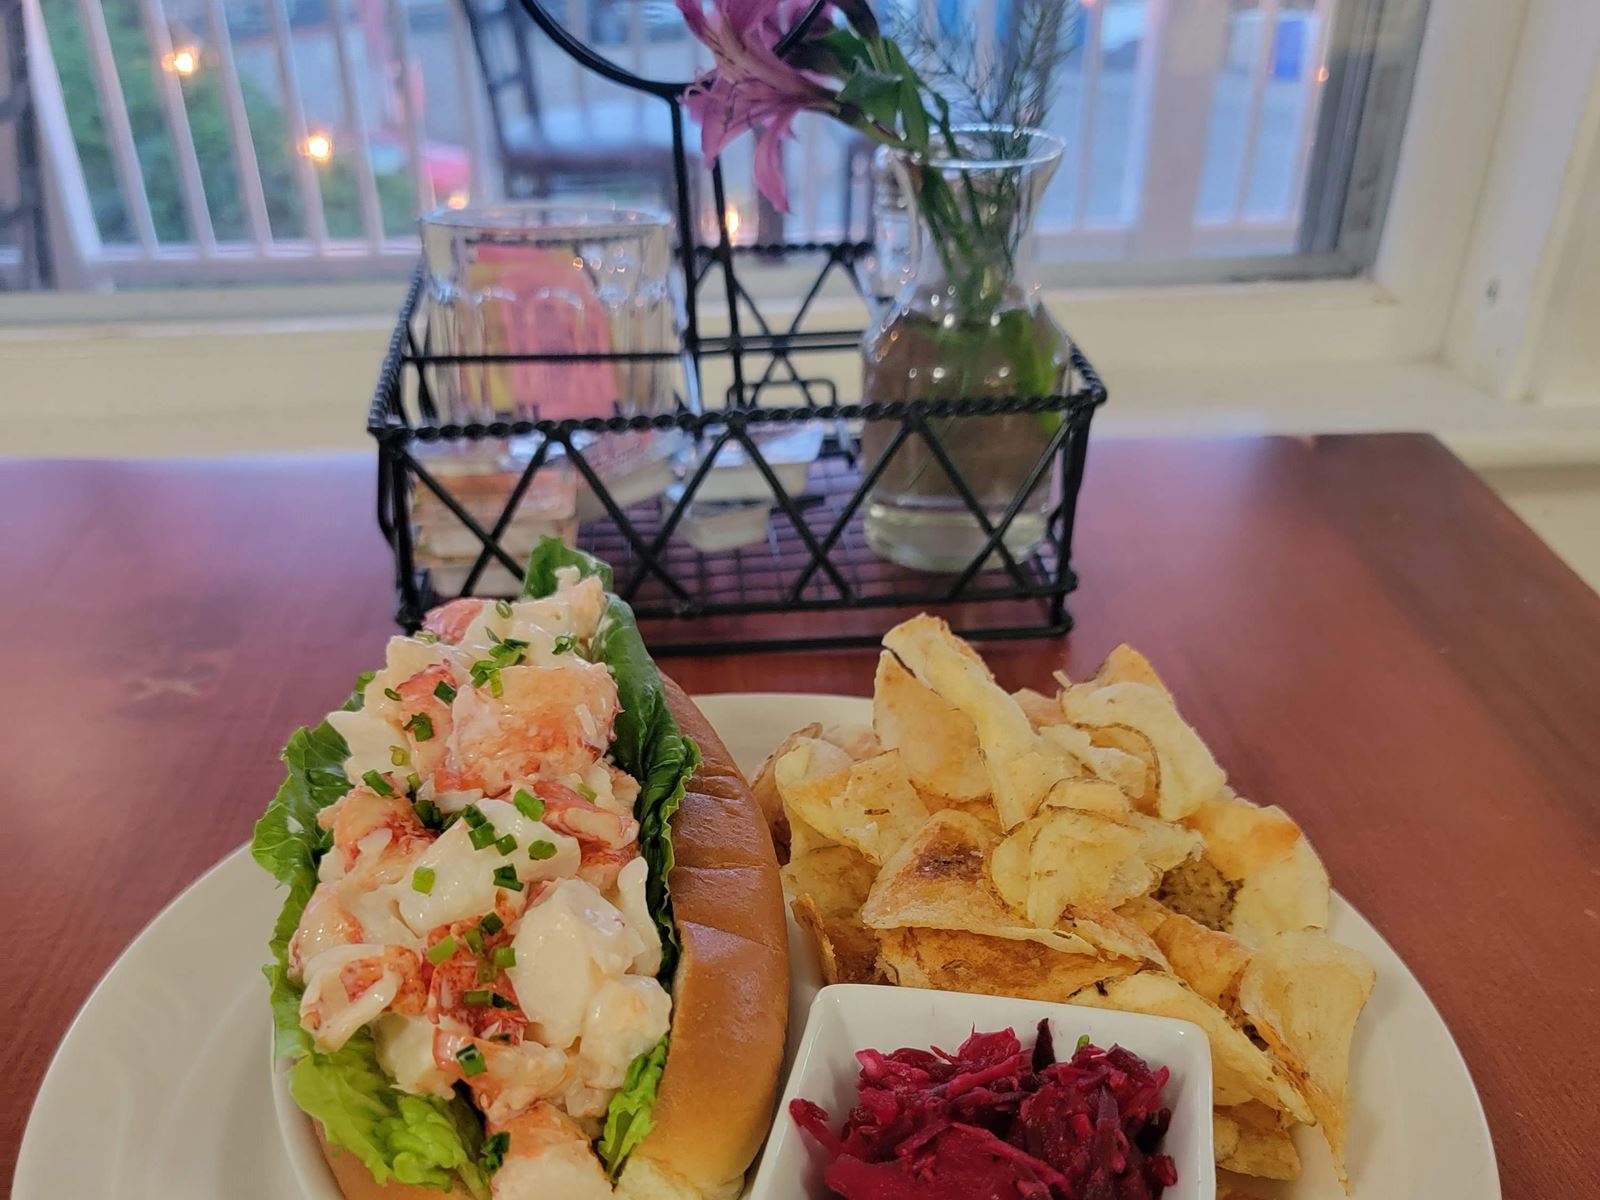 Top 3 Lobster Rolls in Mid-coast Maine